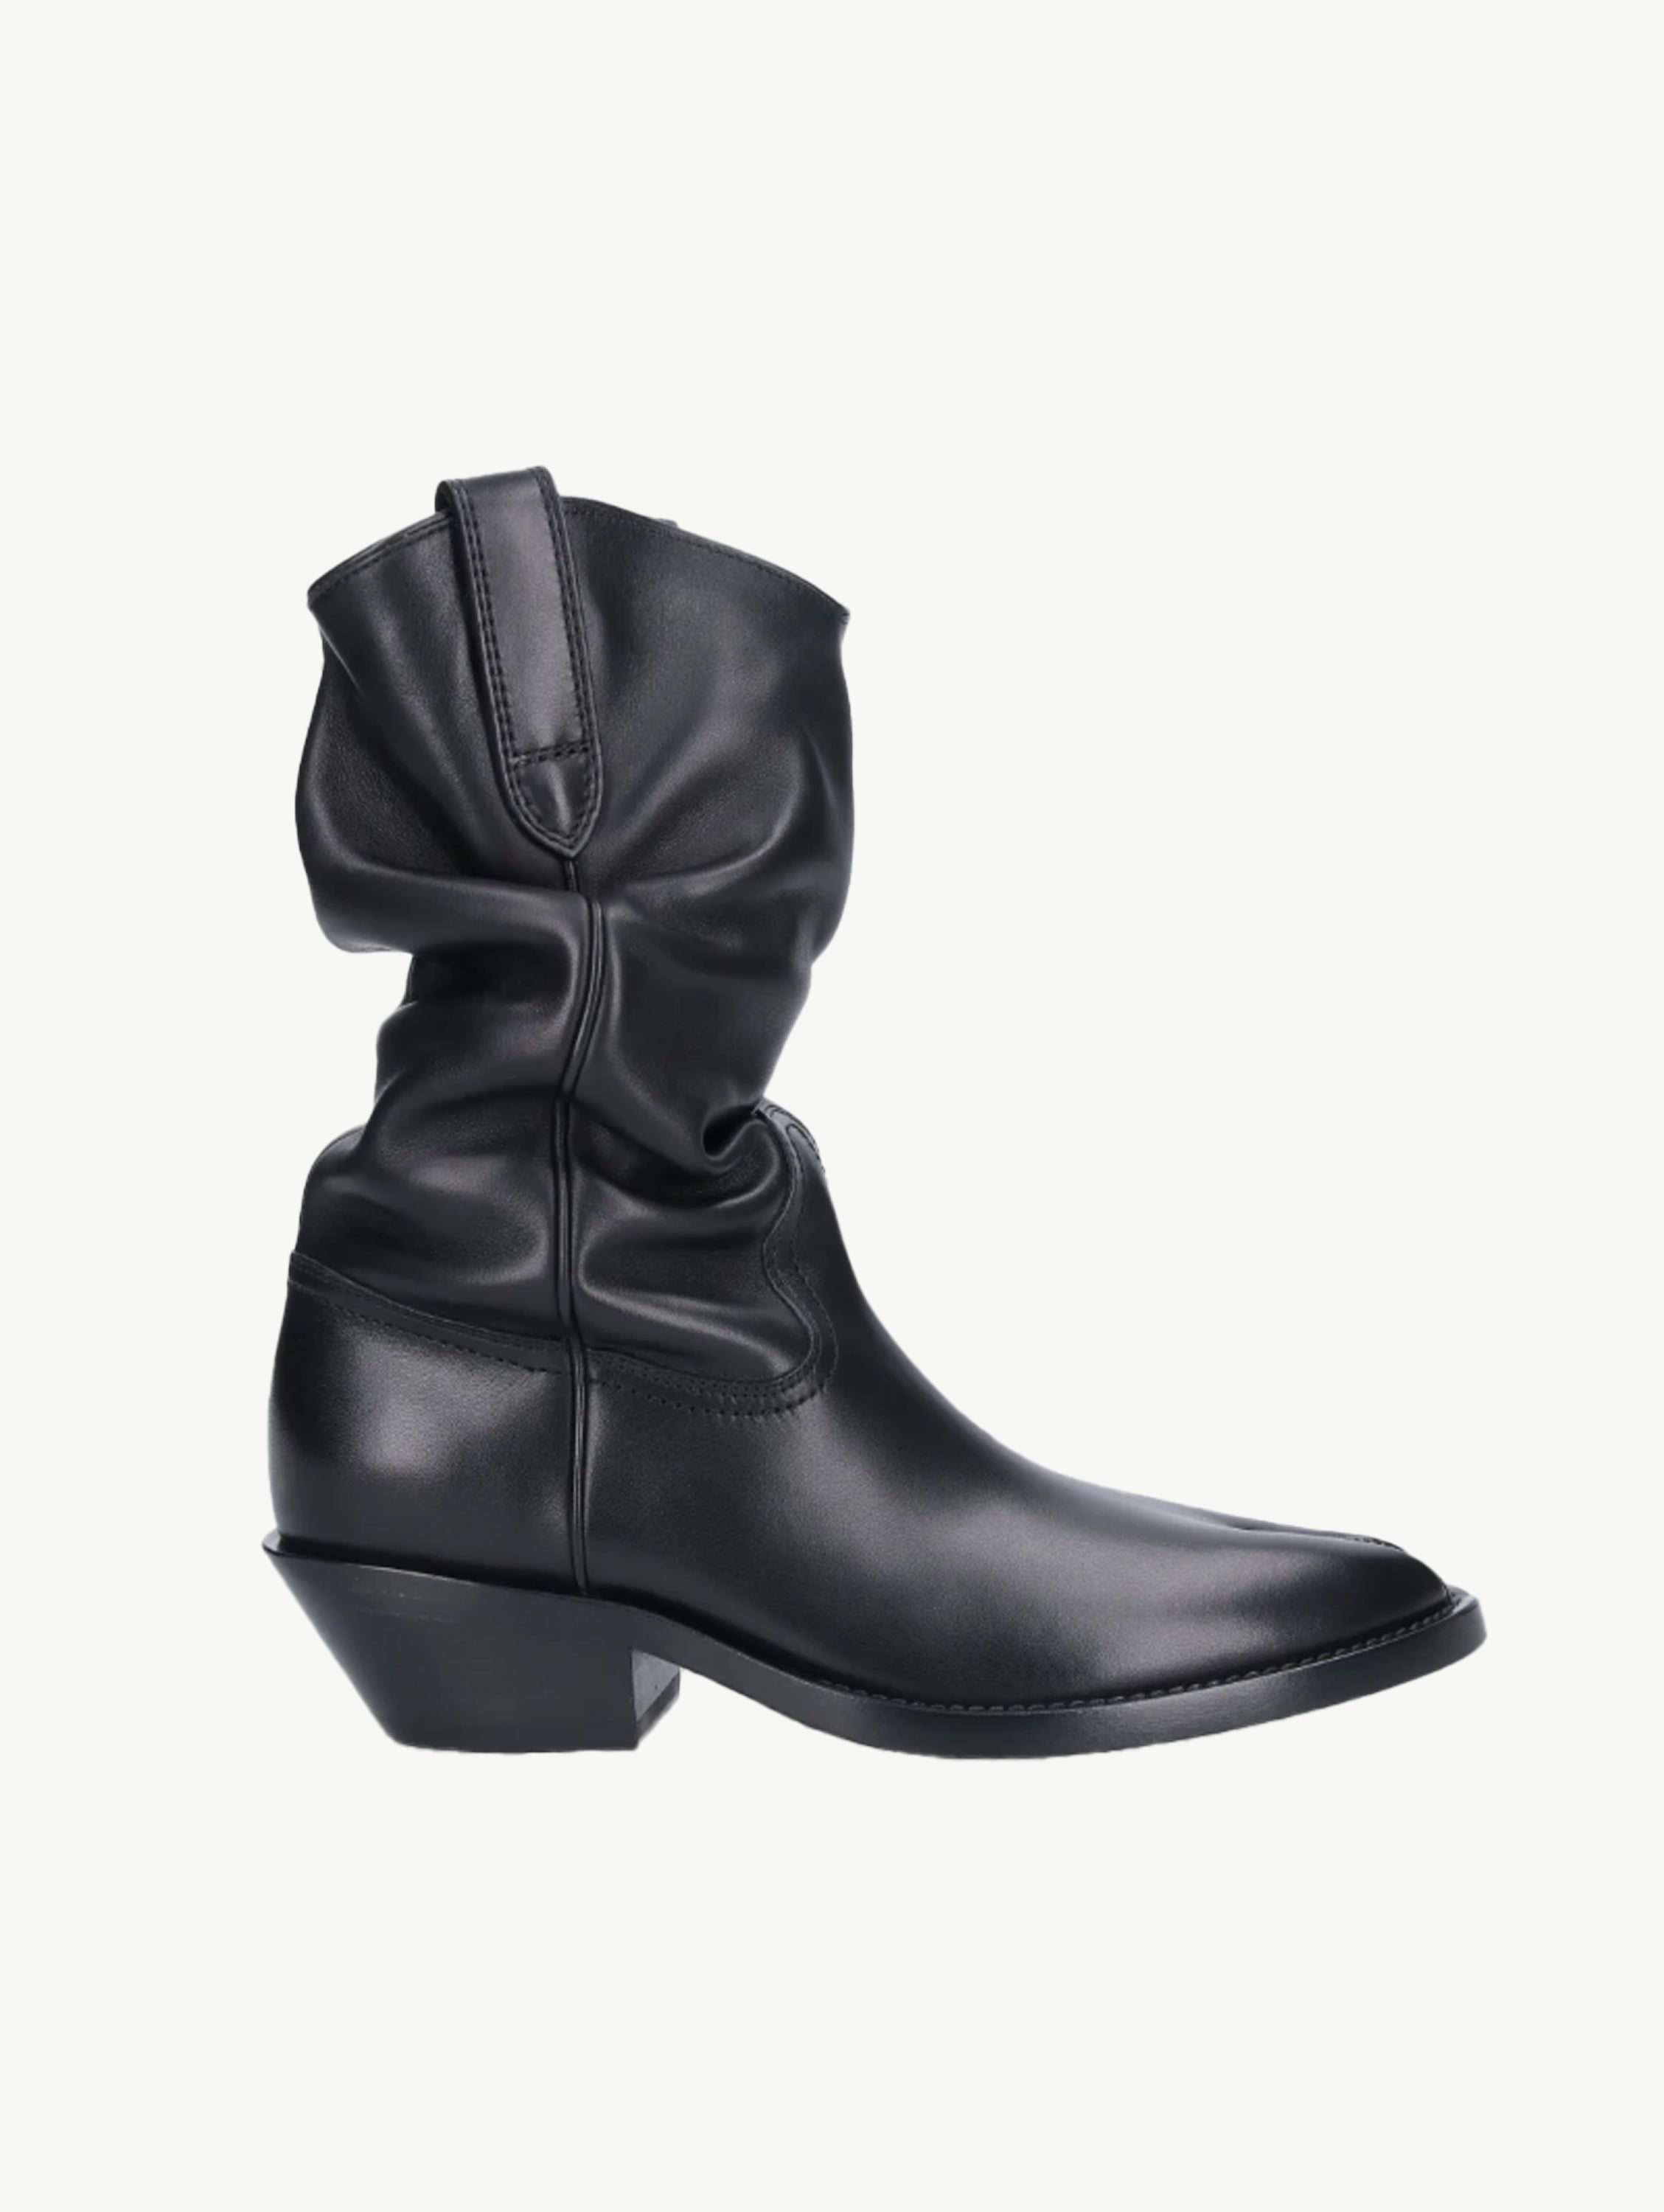 Tabi western ankle boot